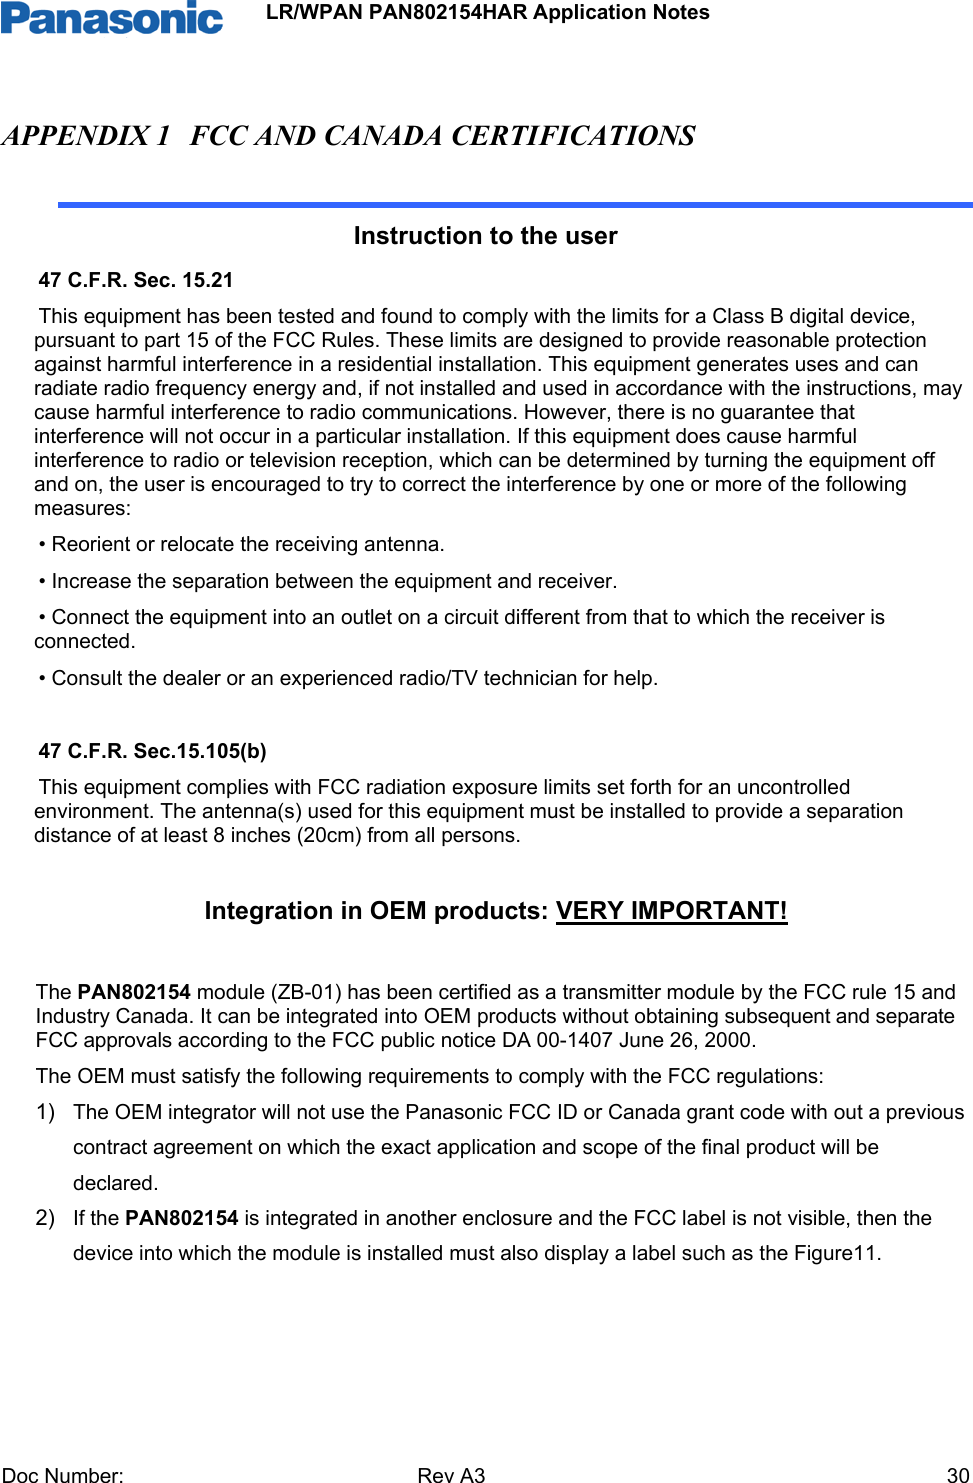                 LR/WPAN PAN802154HAR Application Notes Doc Number:   Rev A3    30APPENDIX 1 FCC AND CANADA CERTIFICATIONS  Instruction to the user 47 C.F.R. Sec. 15.21 This equipment has been tested and found to comply with the limits for a Class B digital device, pursuant to part 15 of the FCC Rules. These limits are designed to provide reasonable protection against harmful interference in a residential installation. This equipment generates uses and can radiate radio frequency energy and, if not installed and used in accordance with the instructions, may cause harmful interference to radio communications. However, there is no guarantee that interference will not occur in a particular installation. If this equipment does cause harmful interference to radio or television reception, which can be determined by turning the equipment off and on, the user is encouraged to try to correct the interference by one or more of the following measures: • Reorient or relocate the receiving antenna. • Increase the separation between the equipment and receiver. • Connect the equipment into an outlet on a circuit different from that to which the receiver is connected. • Consult the dealer or an experienced radio/TV technician for help.  47 C.F.R. Sec.15.105(b) This equipment complies with FCC radiation exposure limits set forth for an uncontrolled environment. The antenna(s) used for this equipment must be installed to provide a separation distance of at least 8 inches (20cm) from all persons.     Integration in OEM products: VERY IMPORTANT!   The PAN802154 module (ZB-01) has been certified as a transmitter module by the FCC rule 15 and Industry Canada. It can be integrated into OEM products without obtaining subsequent and separate FCC approvals according to the FCC public notice DA 00-1407 June 26, 2000.  The OEM must satisfy the following requirements to comply with the FCC regulations: 1)  The OEM integrator will not use the Panasonic FCC ID or Canada grant code with out a previous contract agreement on which the exact application and scope of the final product will be declared. 2)  If the PAN802154 is integrated in another enclosure and the FCC label is not visible, then the device into which the module is installed must also display a label such as the Figure11.    